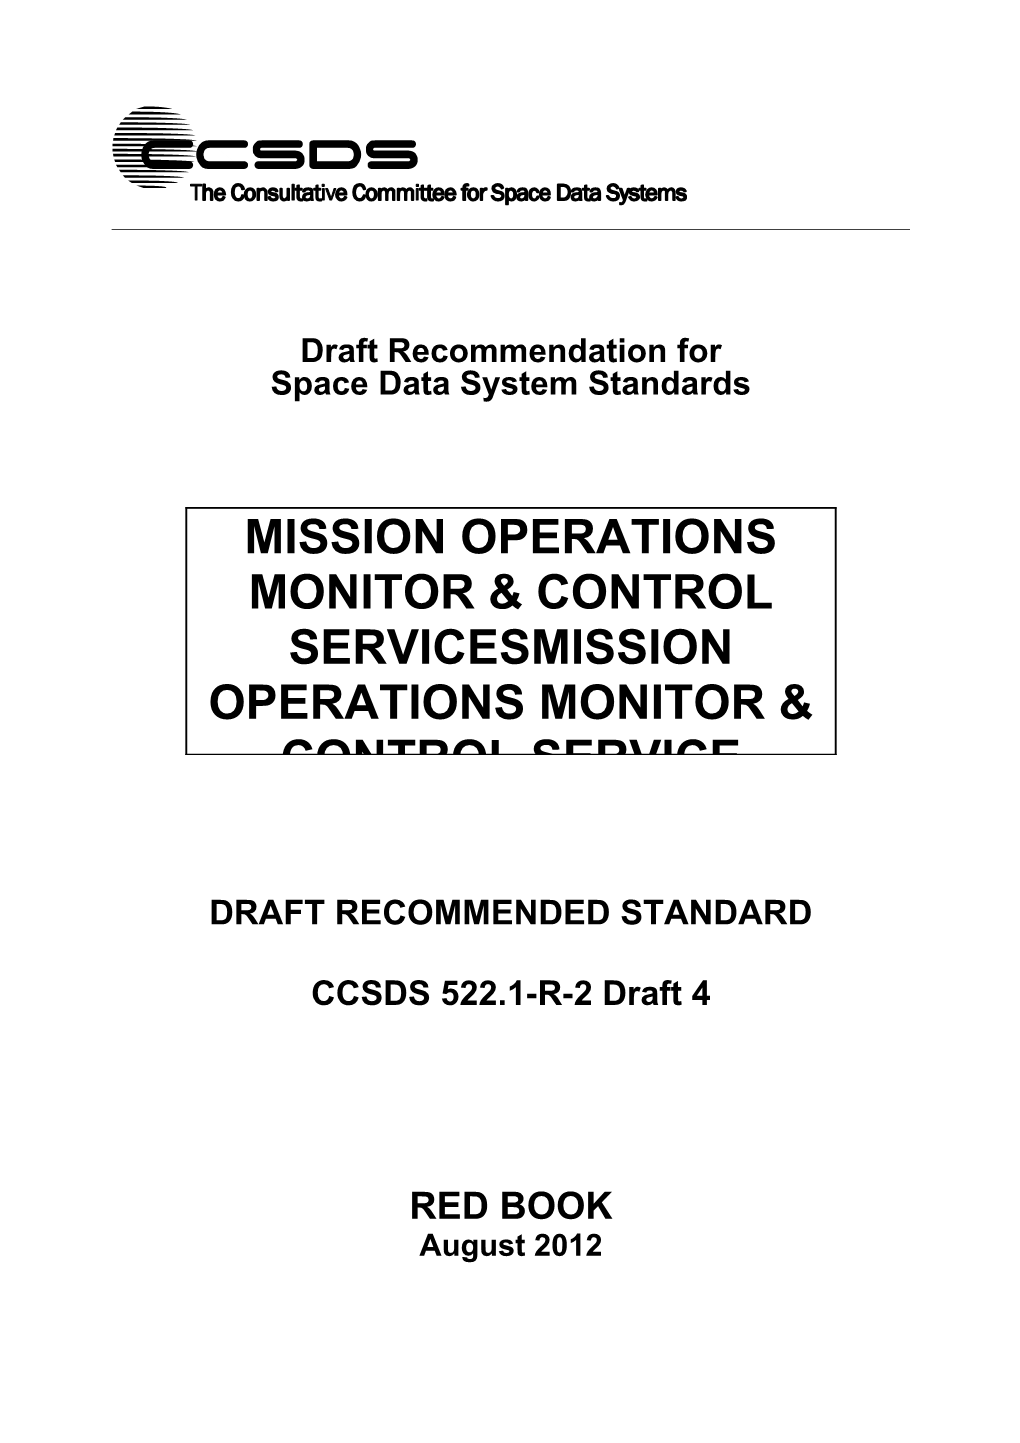 Mission Operations Monitor & Control Services